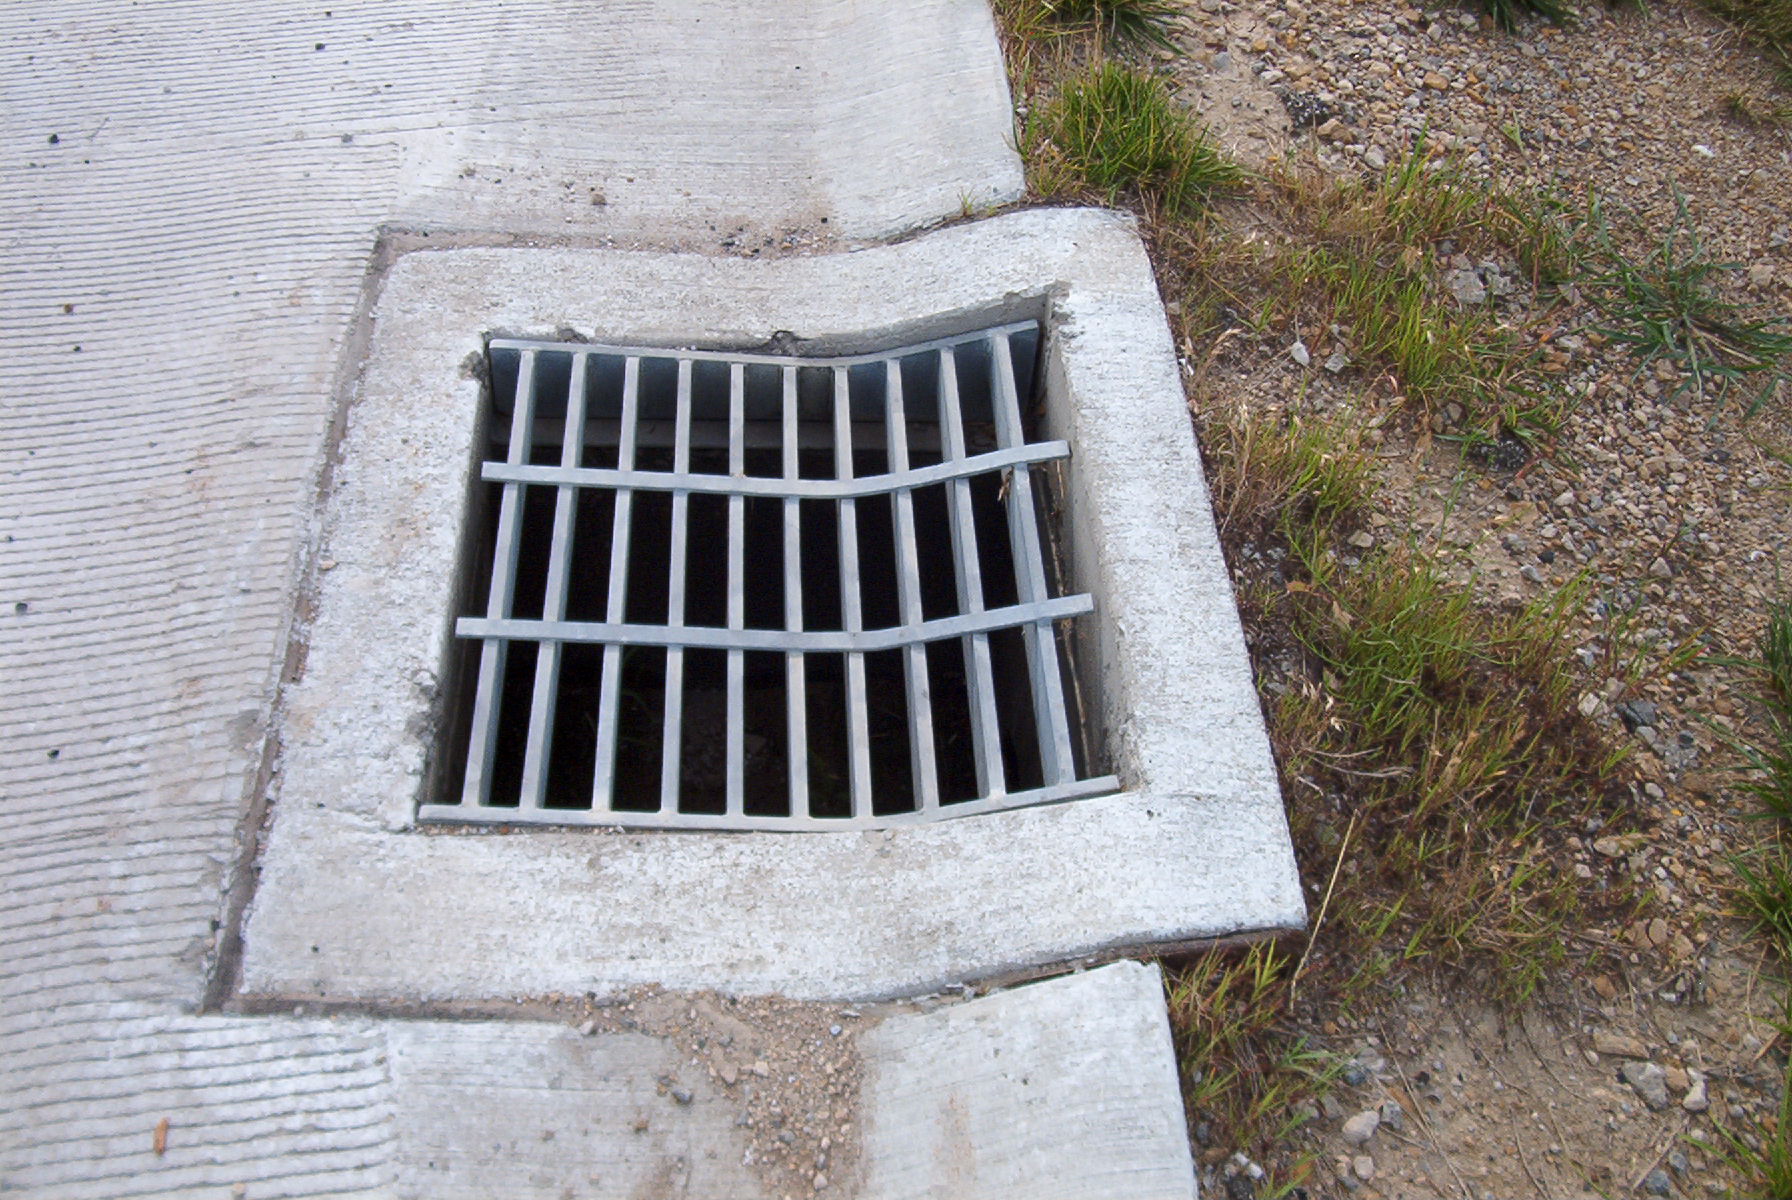 Steel bar grate in a drainage ditch.